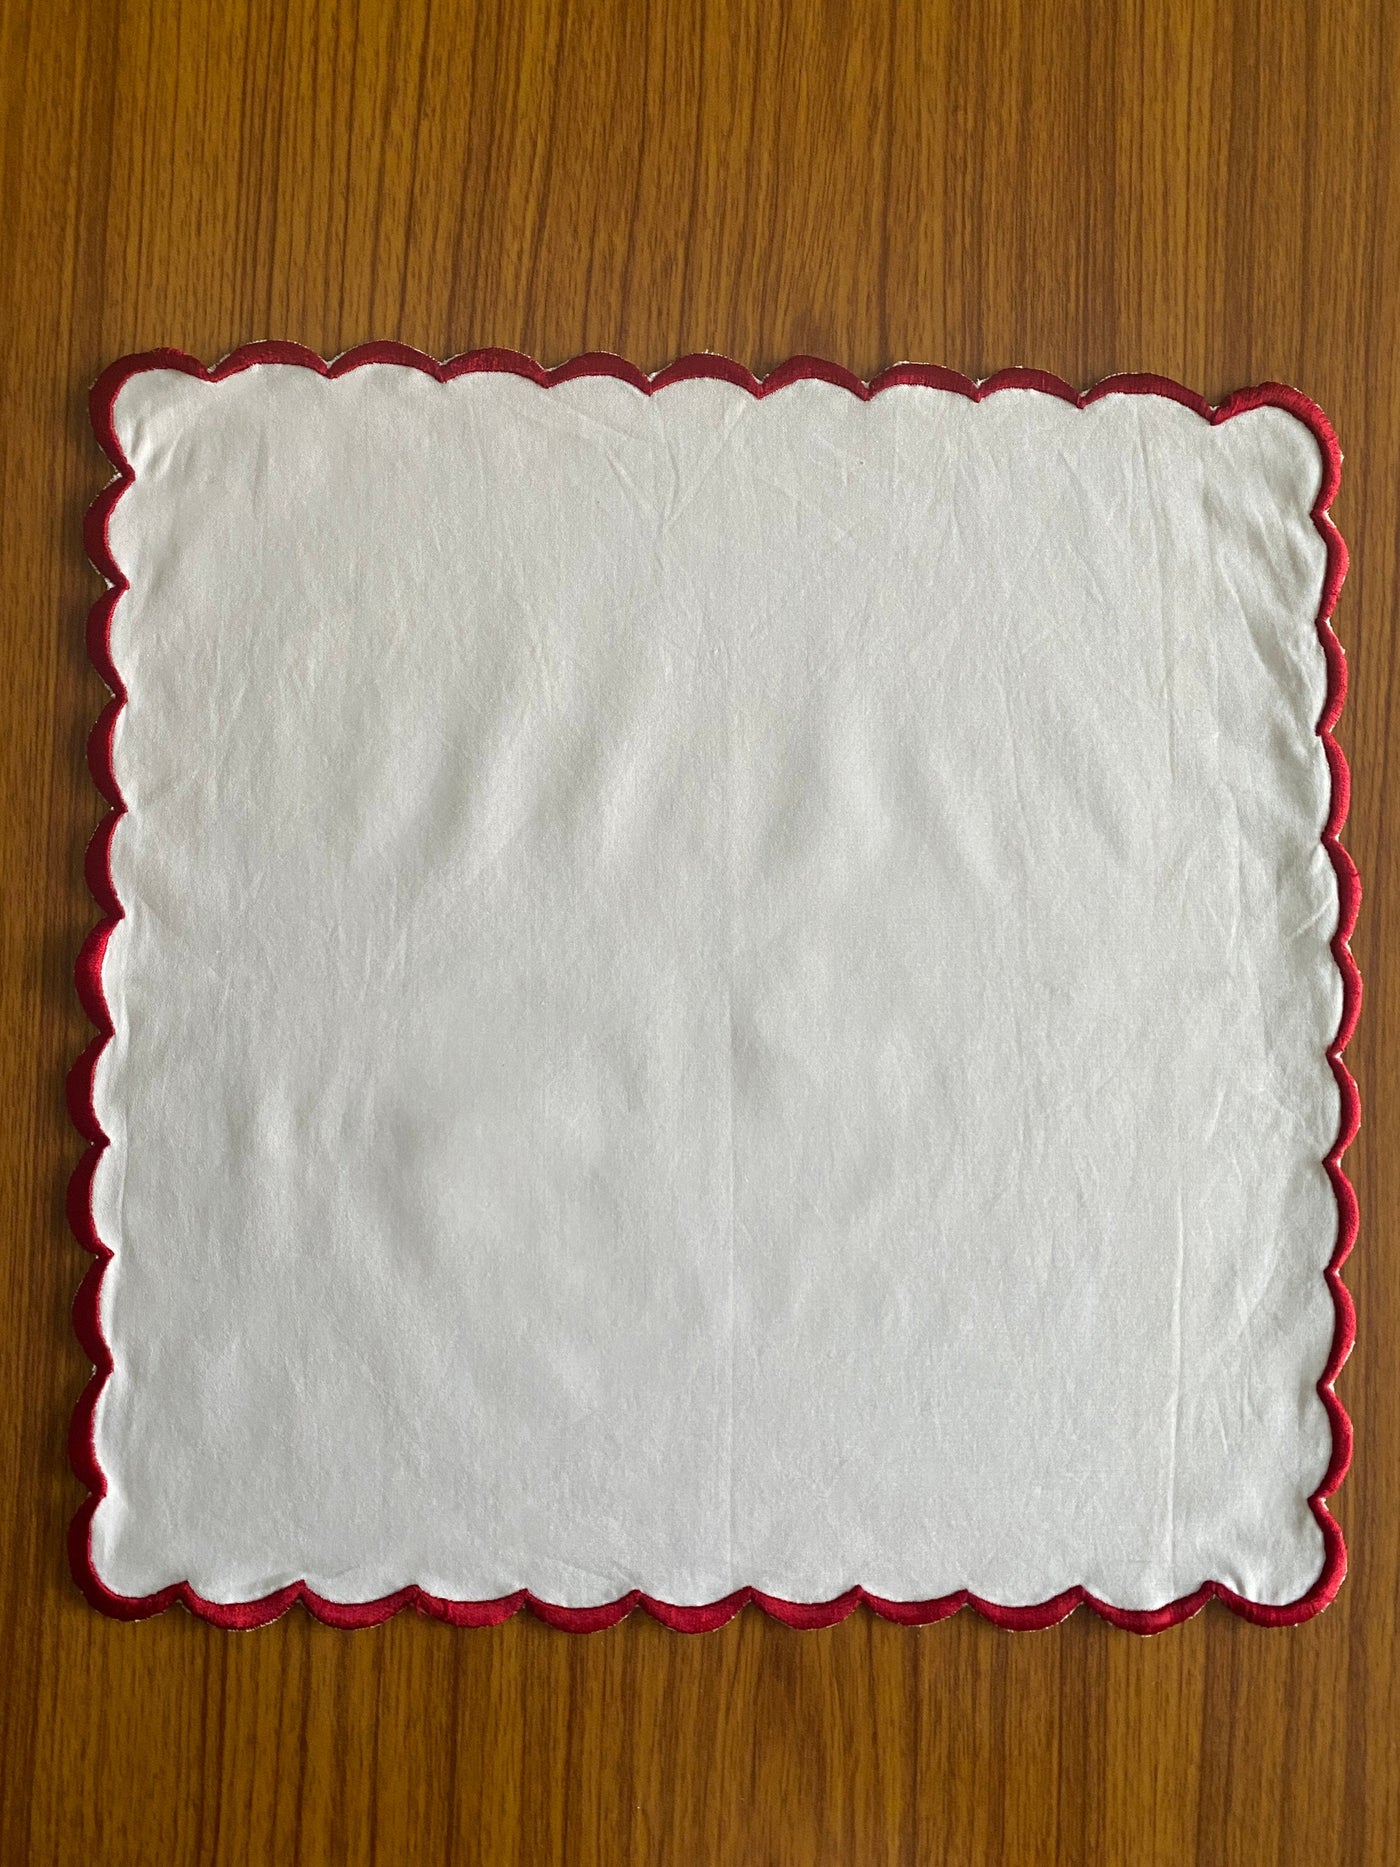 White Indian Soft Cotton Cloth Embroidered Scallops Napkins, Housewarming Farmhouse Home Event Wedding Gifts, 9X9"- Cocktail 18x18"- Dinner